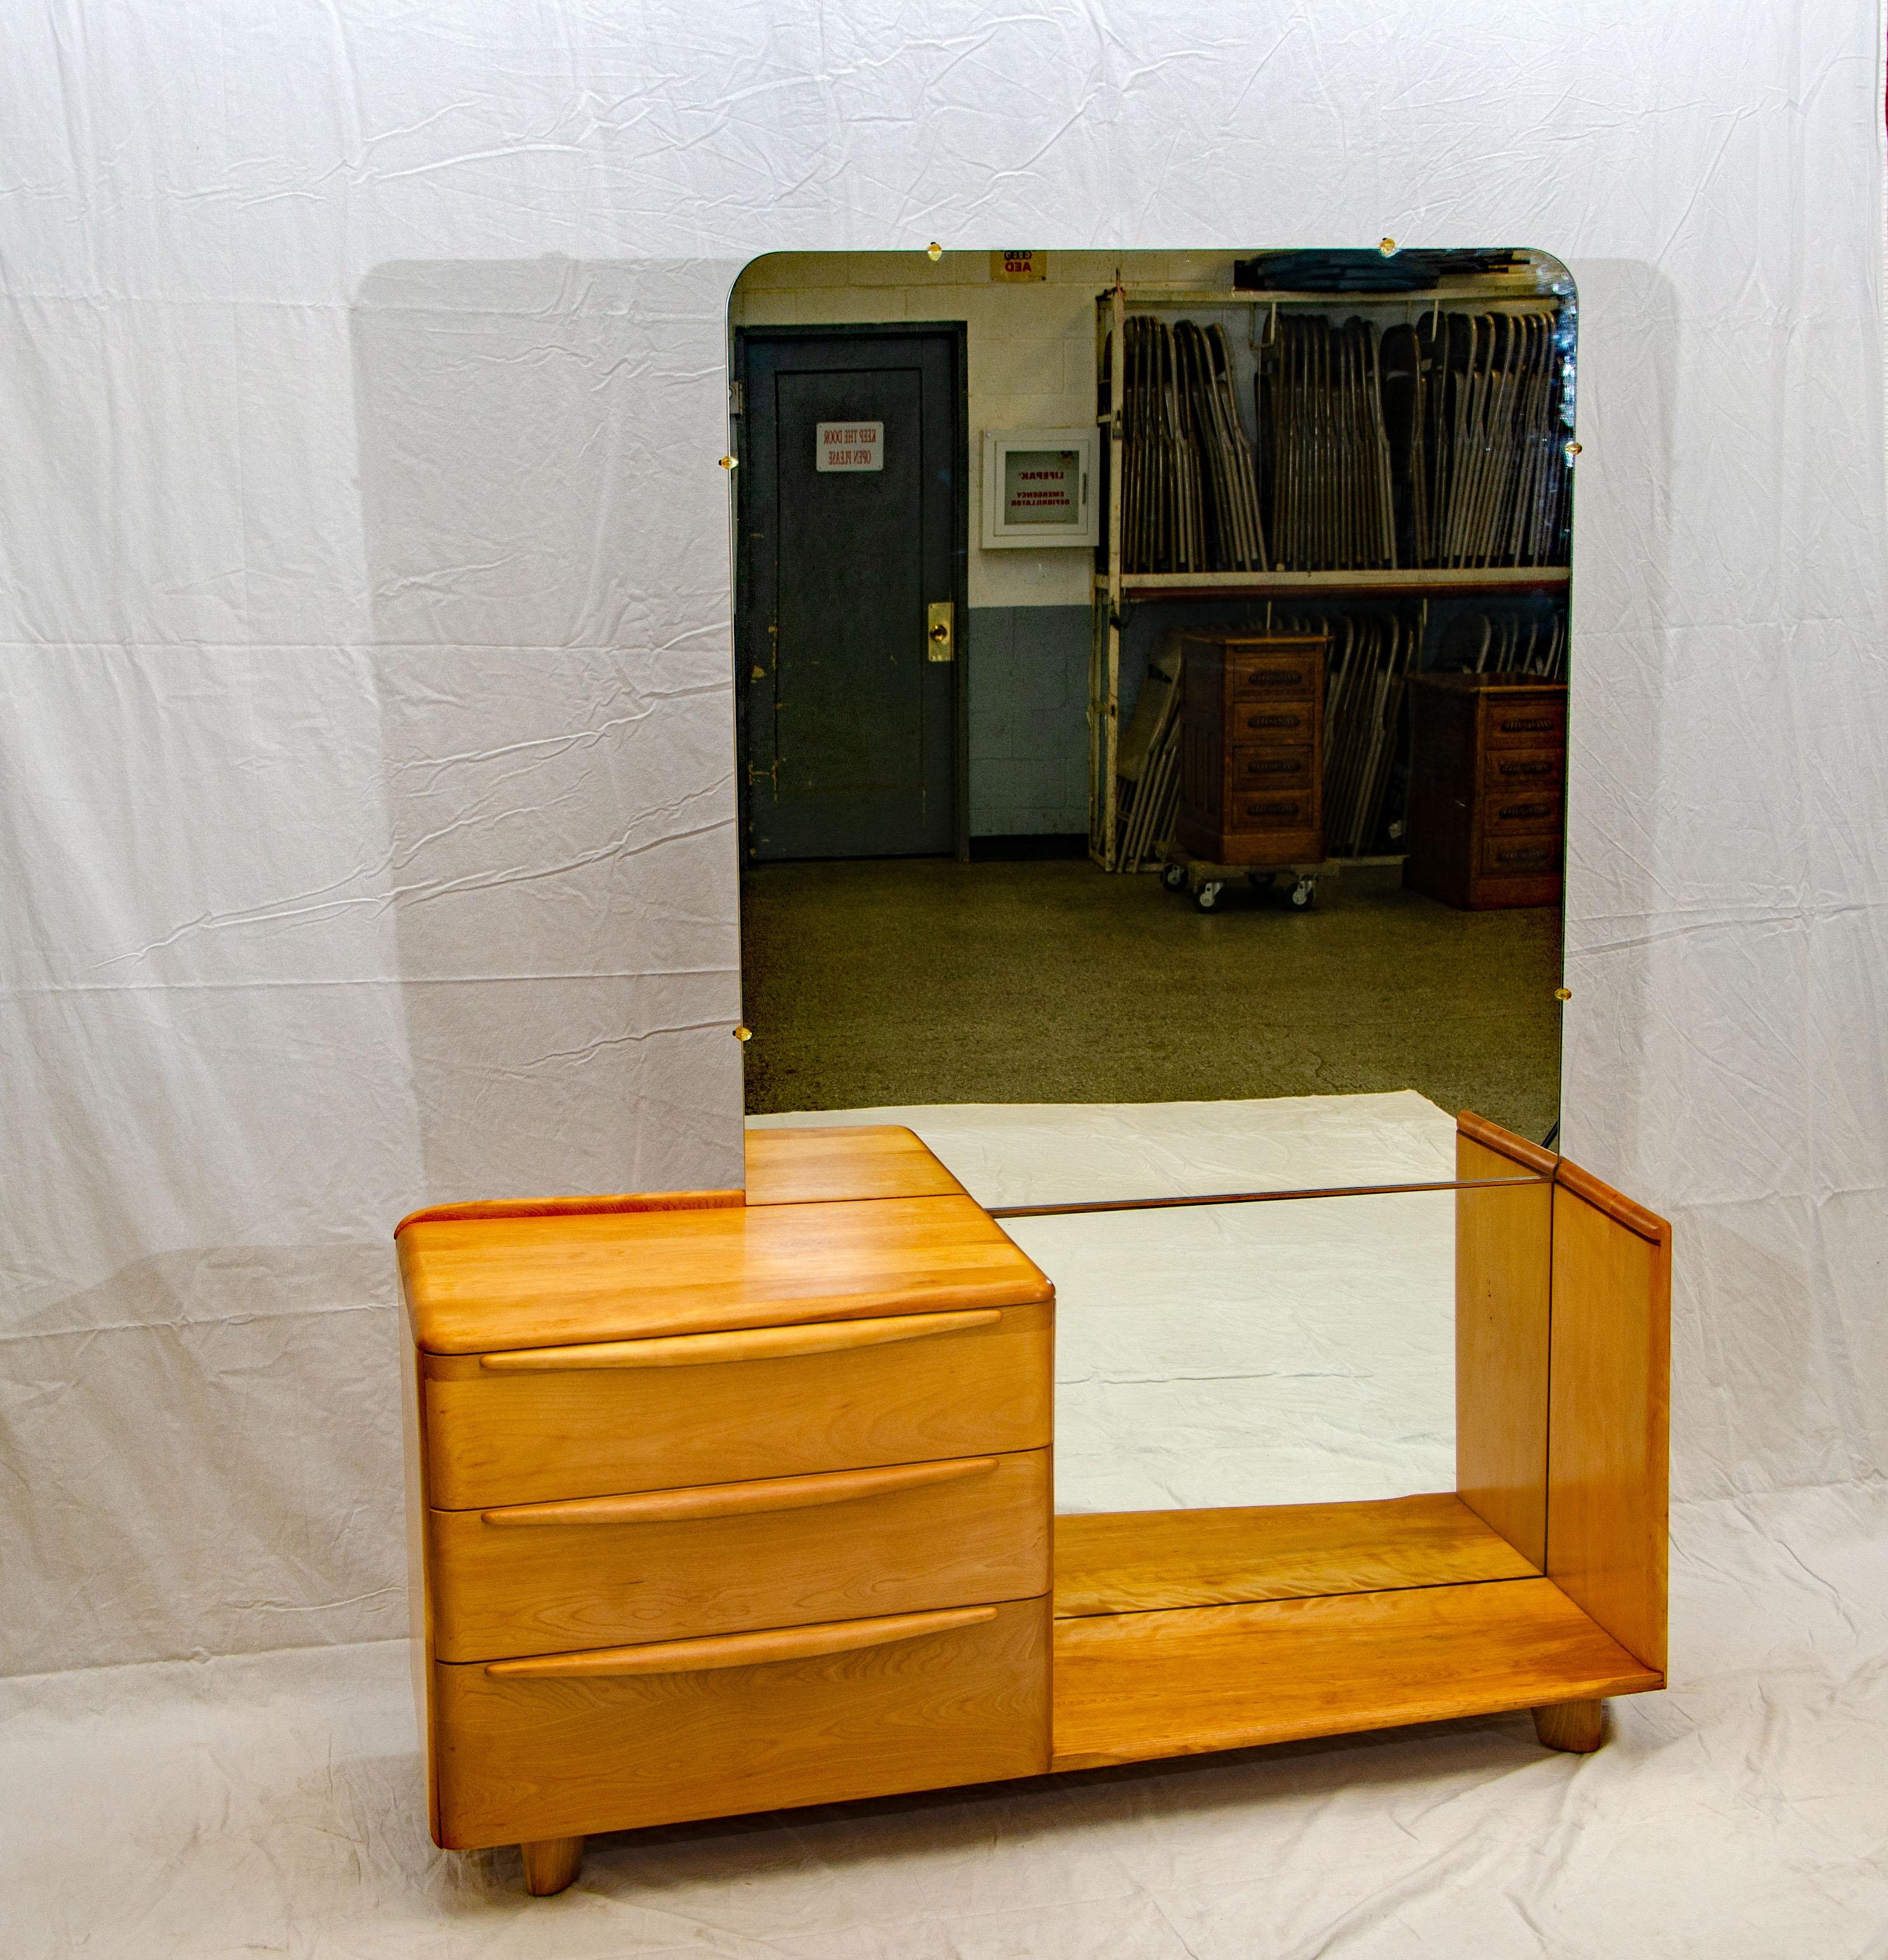 This angular vanity has both the full-length mirror feature and some drawer storage. The drawer section measures 26